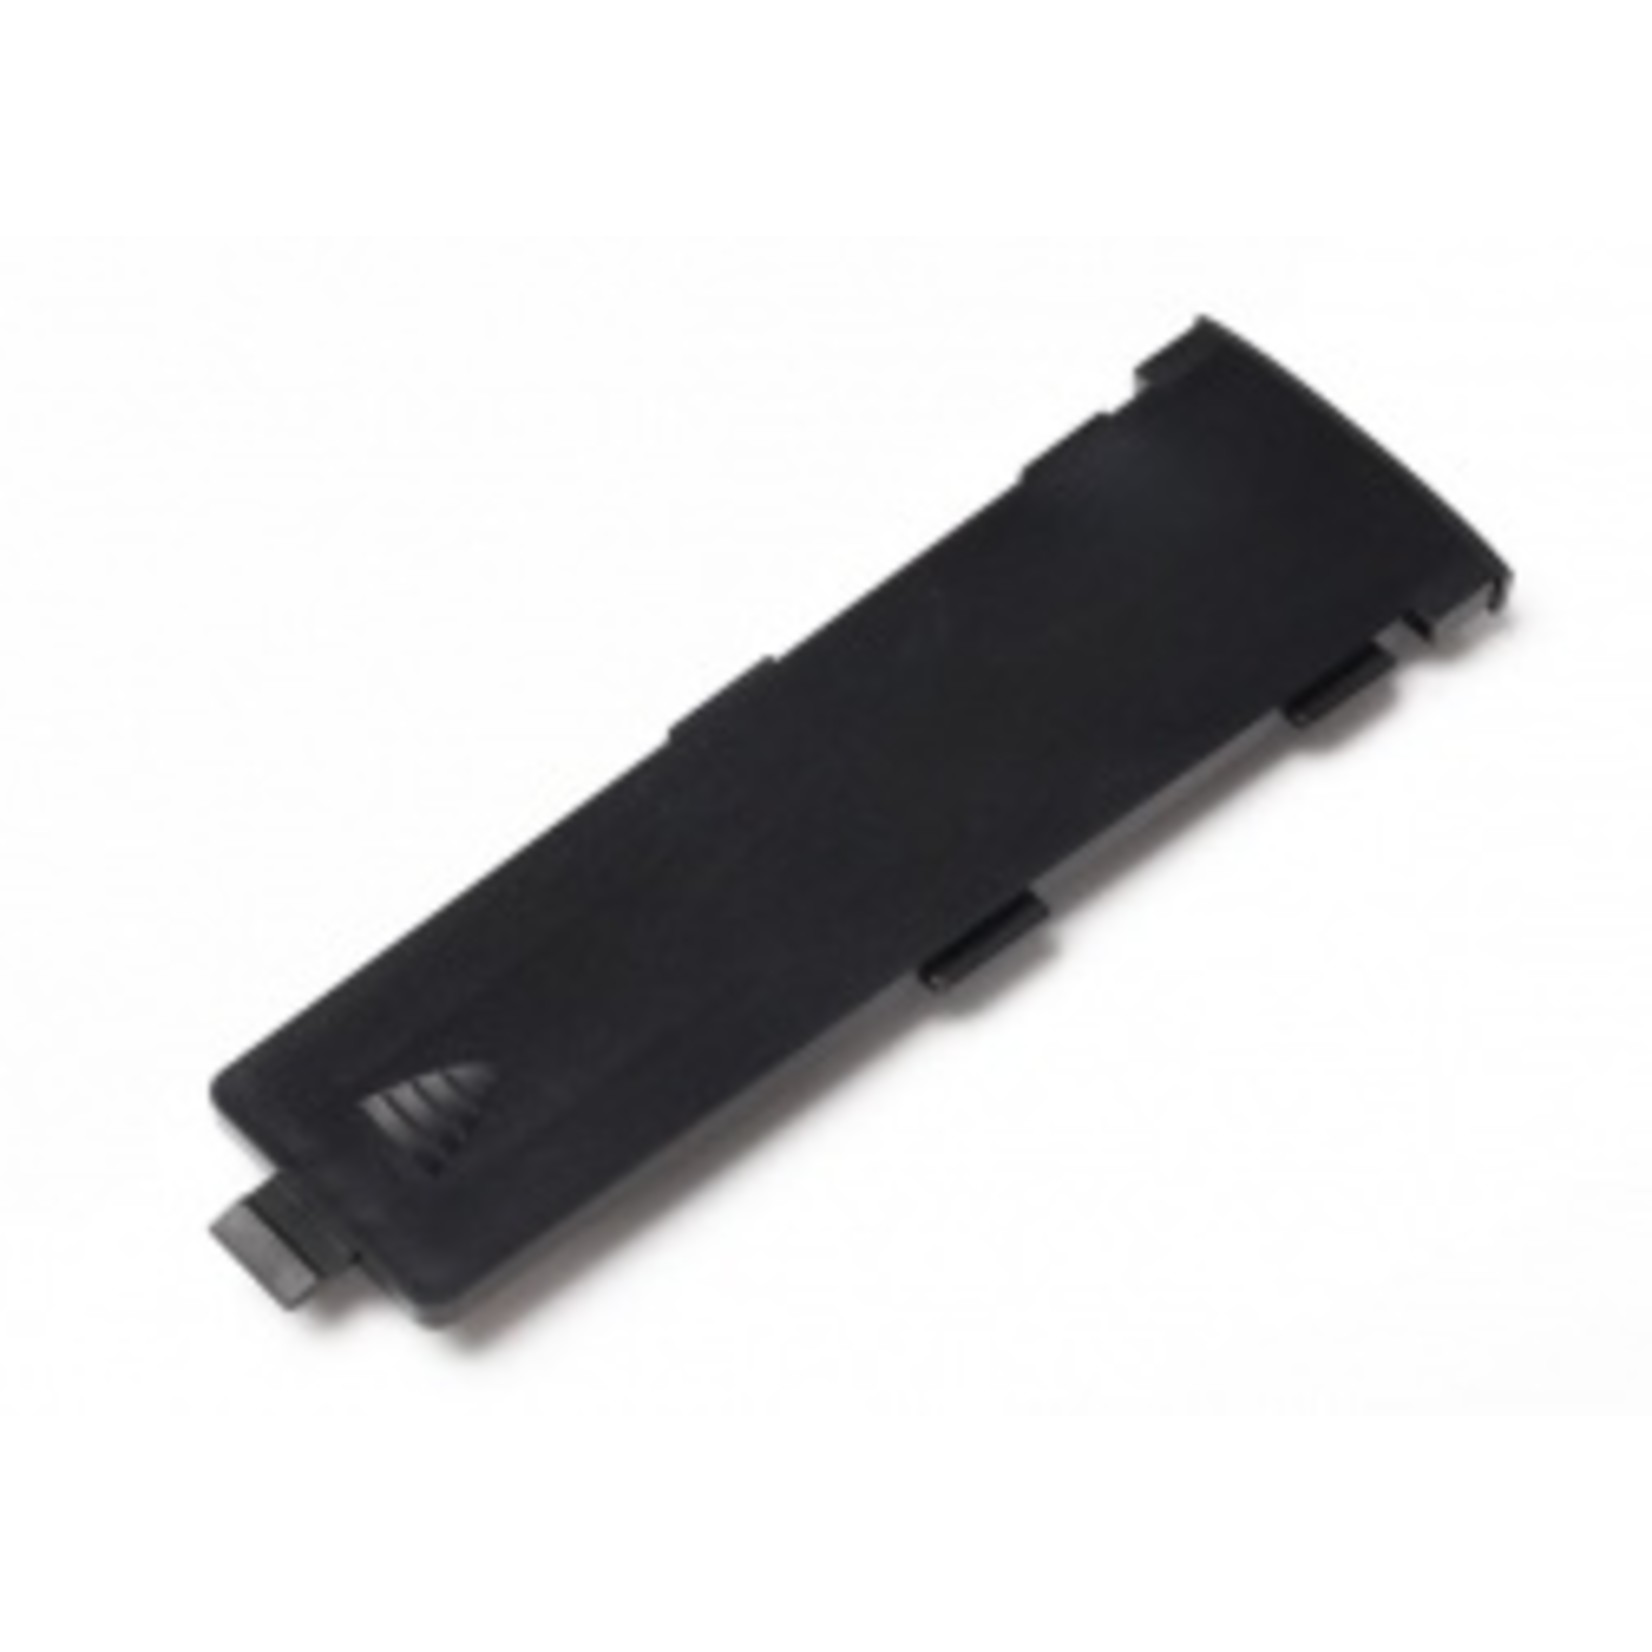 Traxxas Battery door, TQi transmitter (replacement for #6513, 6514, 6515 transmitters)